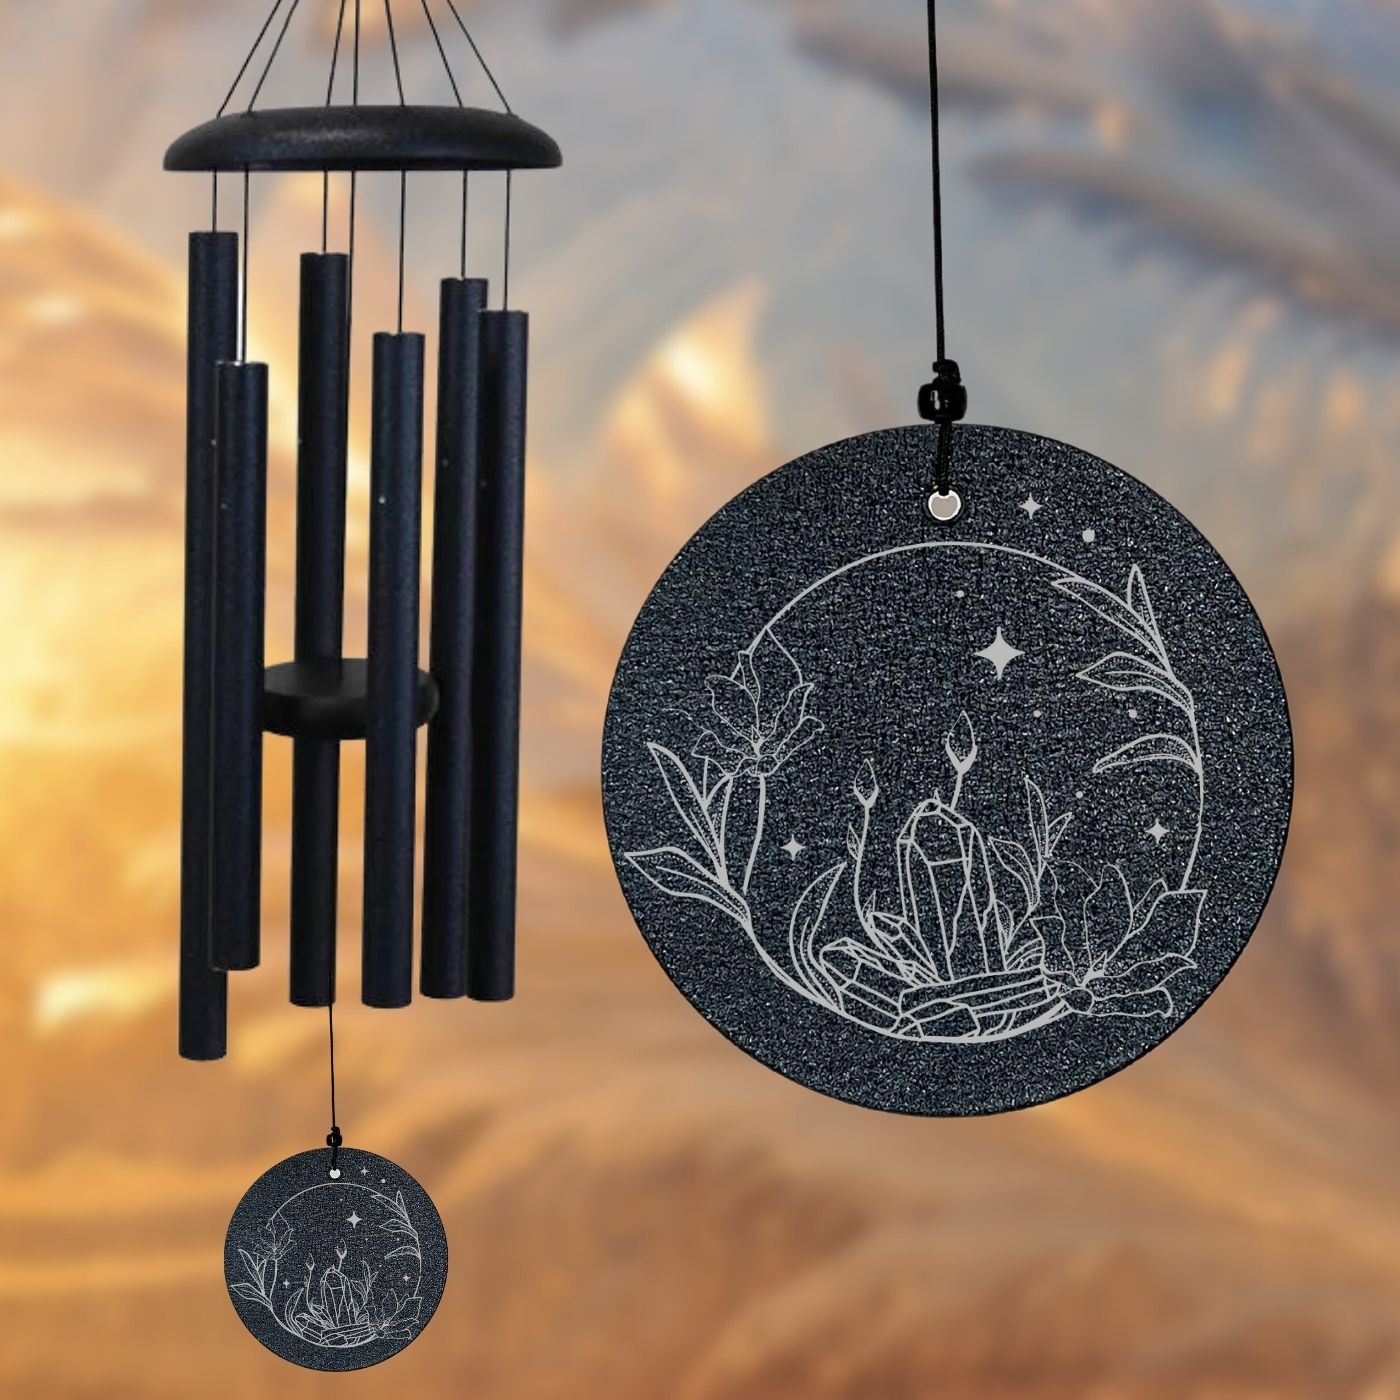 Corinthian Bells Midnight Blue Crystal Circle Wind Chime - Scale Of A